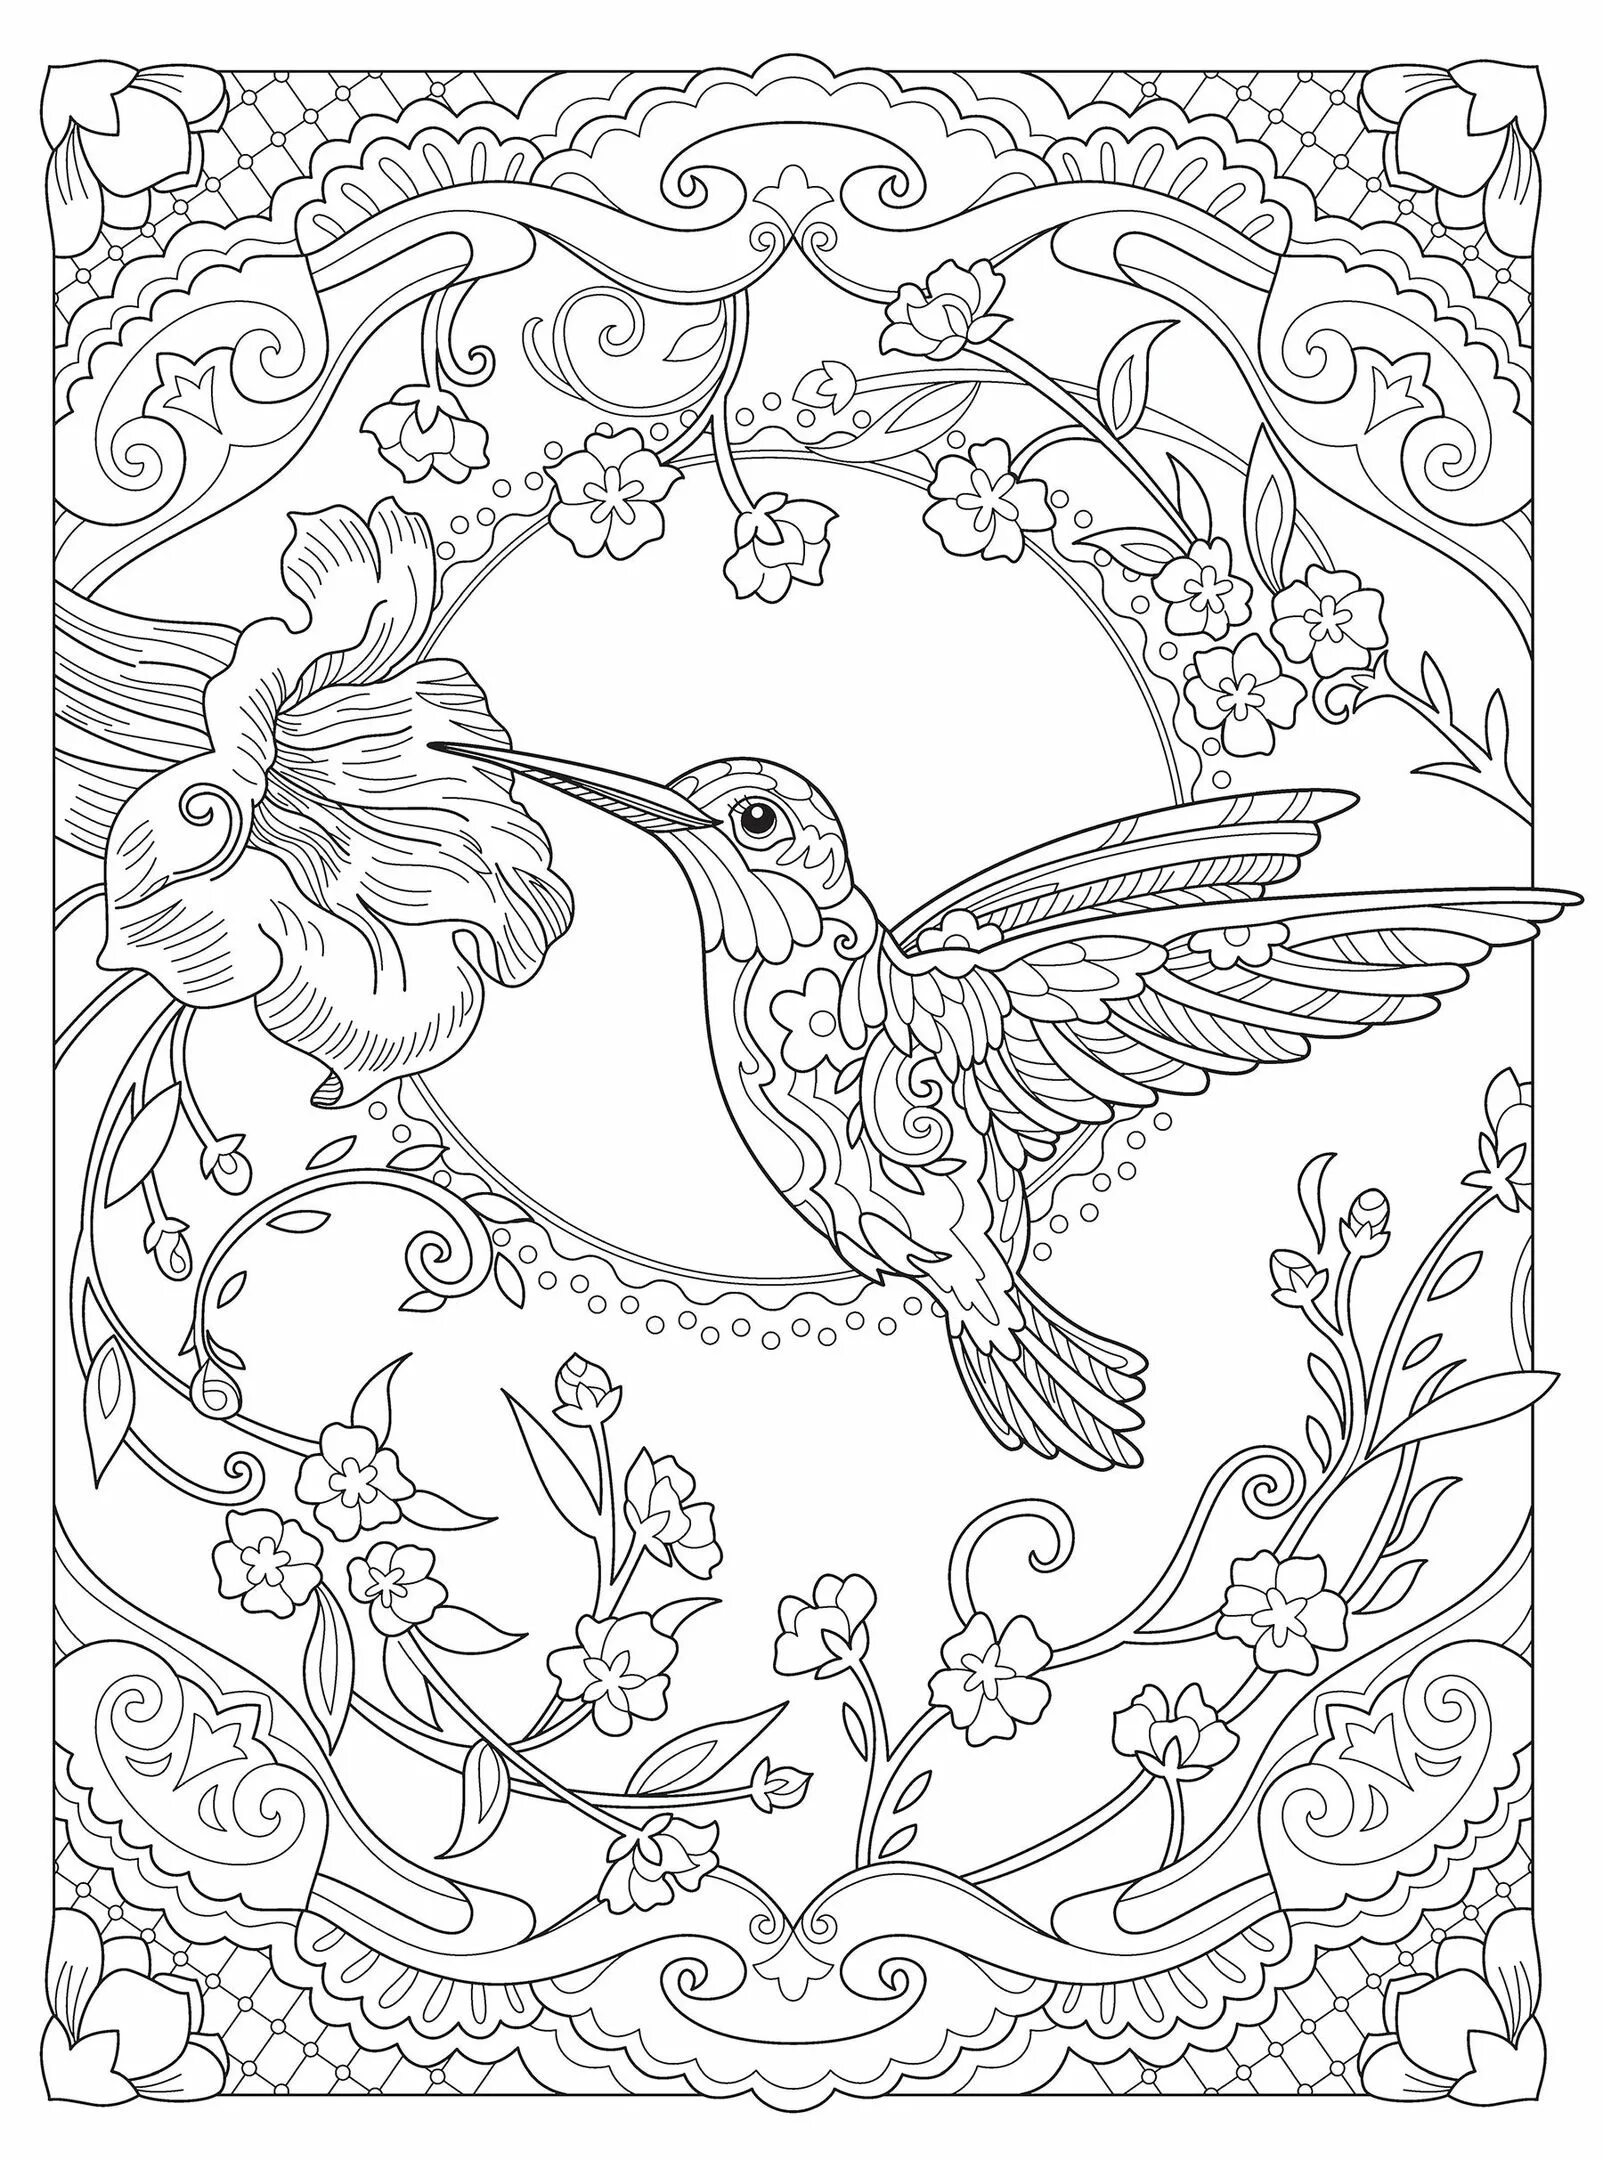 Surreal coloring art page